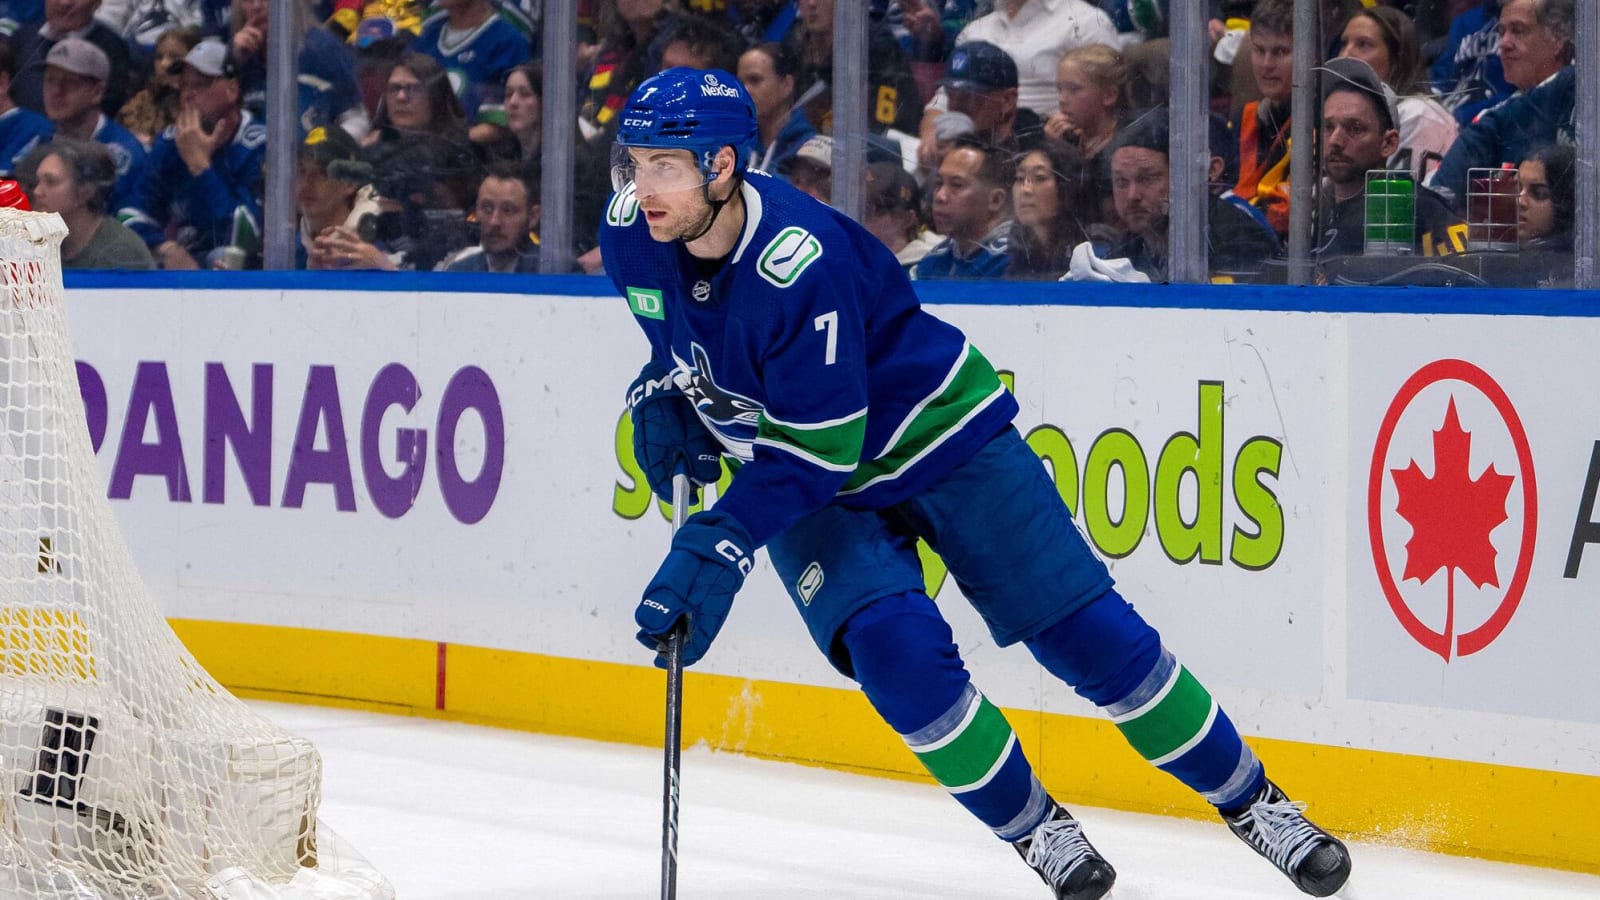 Canucks’ Soucy to Have Hearing For Cross-Check to McDavid